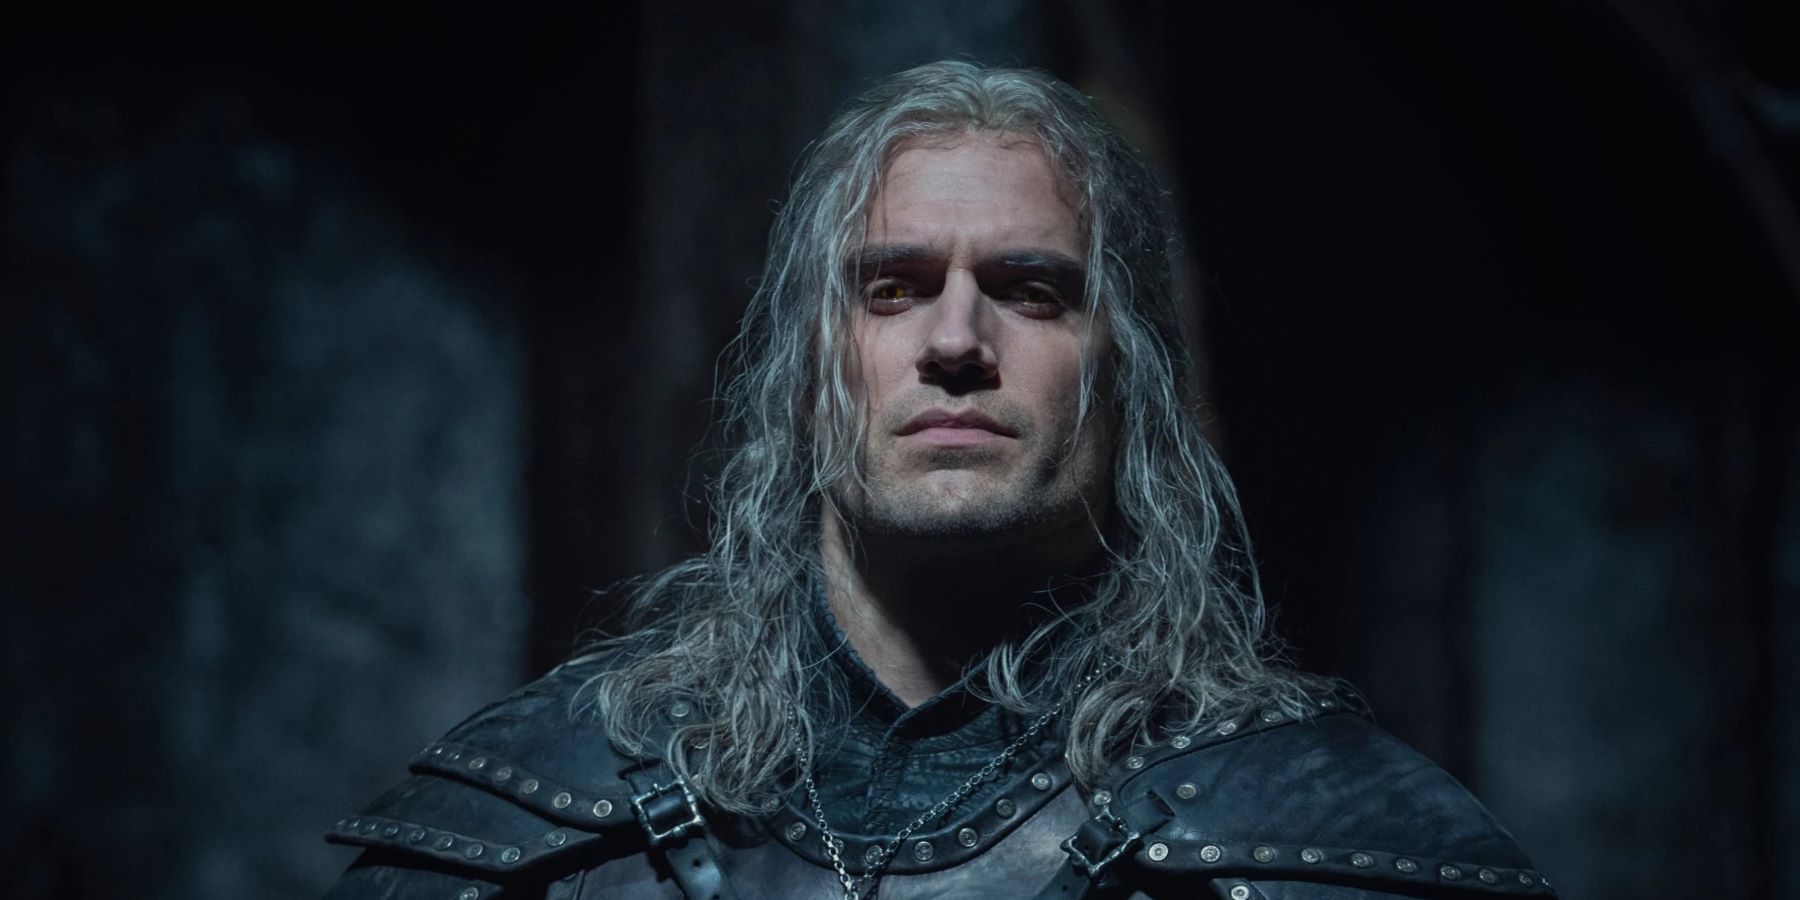 Lap it up: Henry Cavill's dog is in The Witcher 3 now